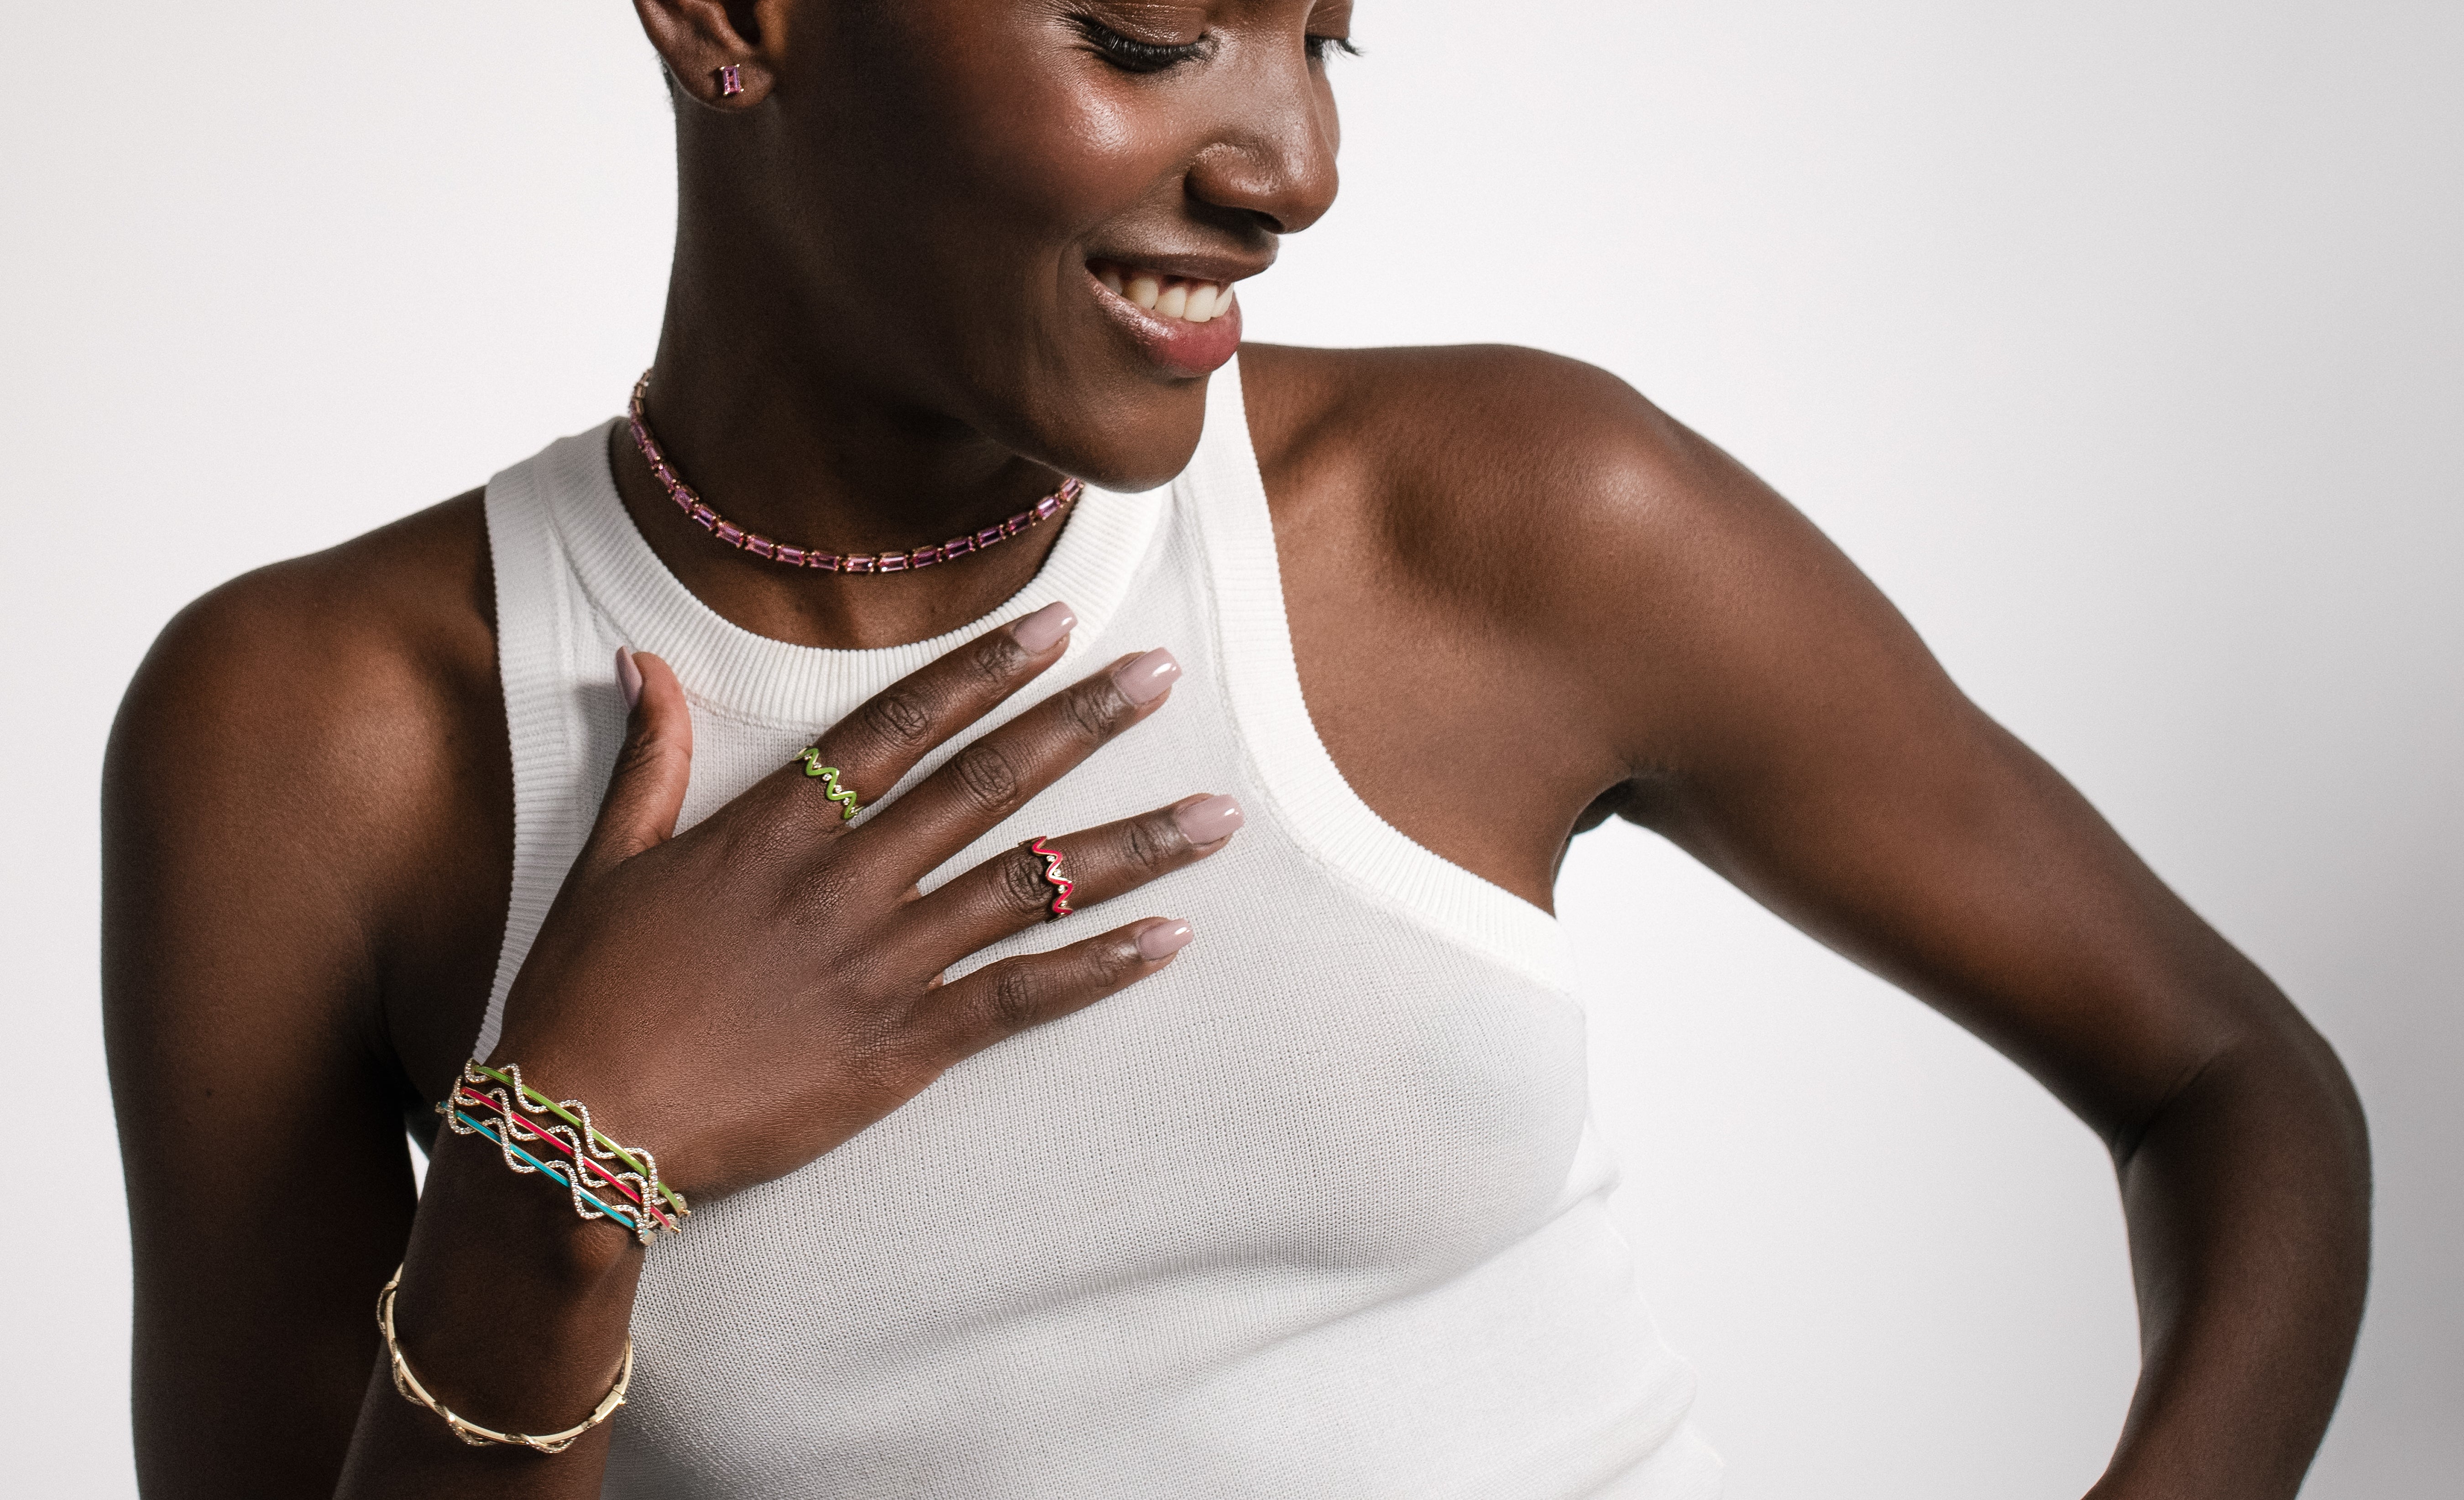 GO CRAZY WITH JEWELLERY IN ELECTRIFYING COLORS